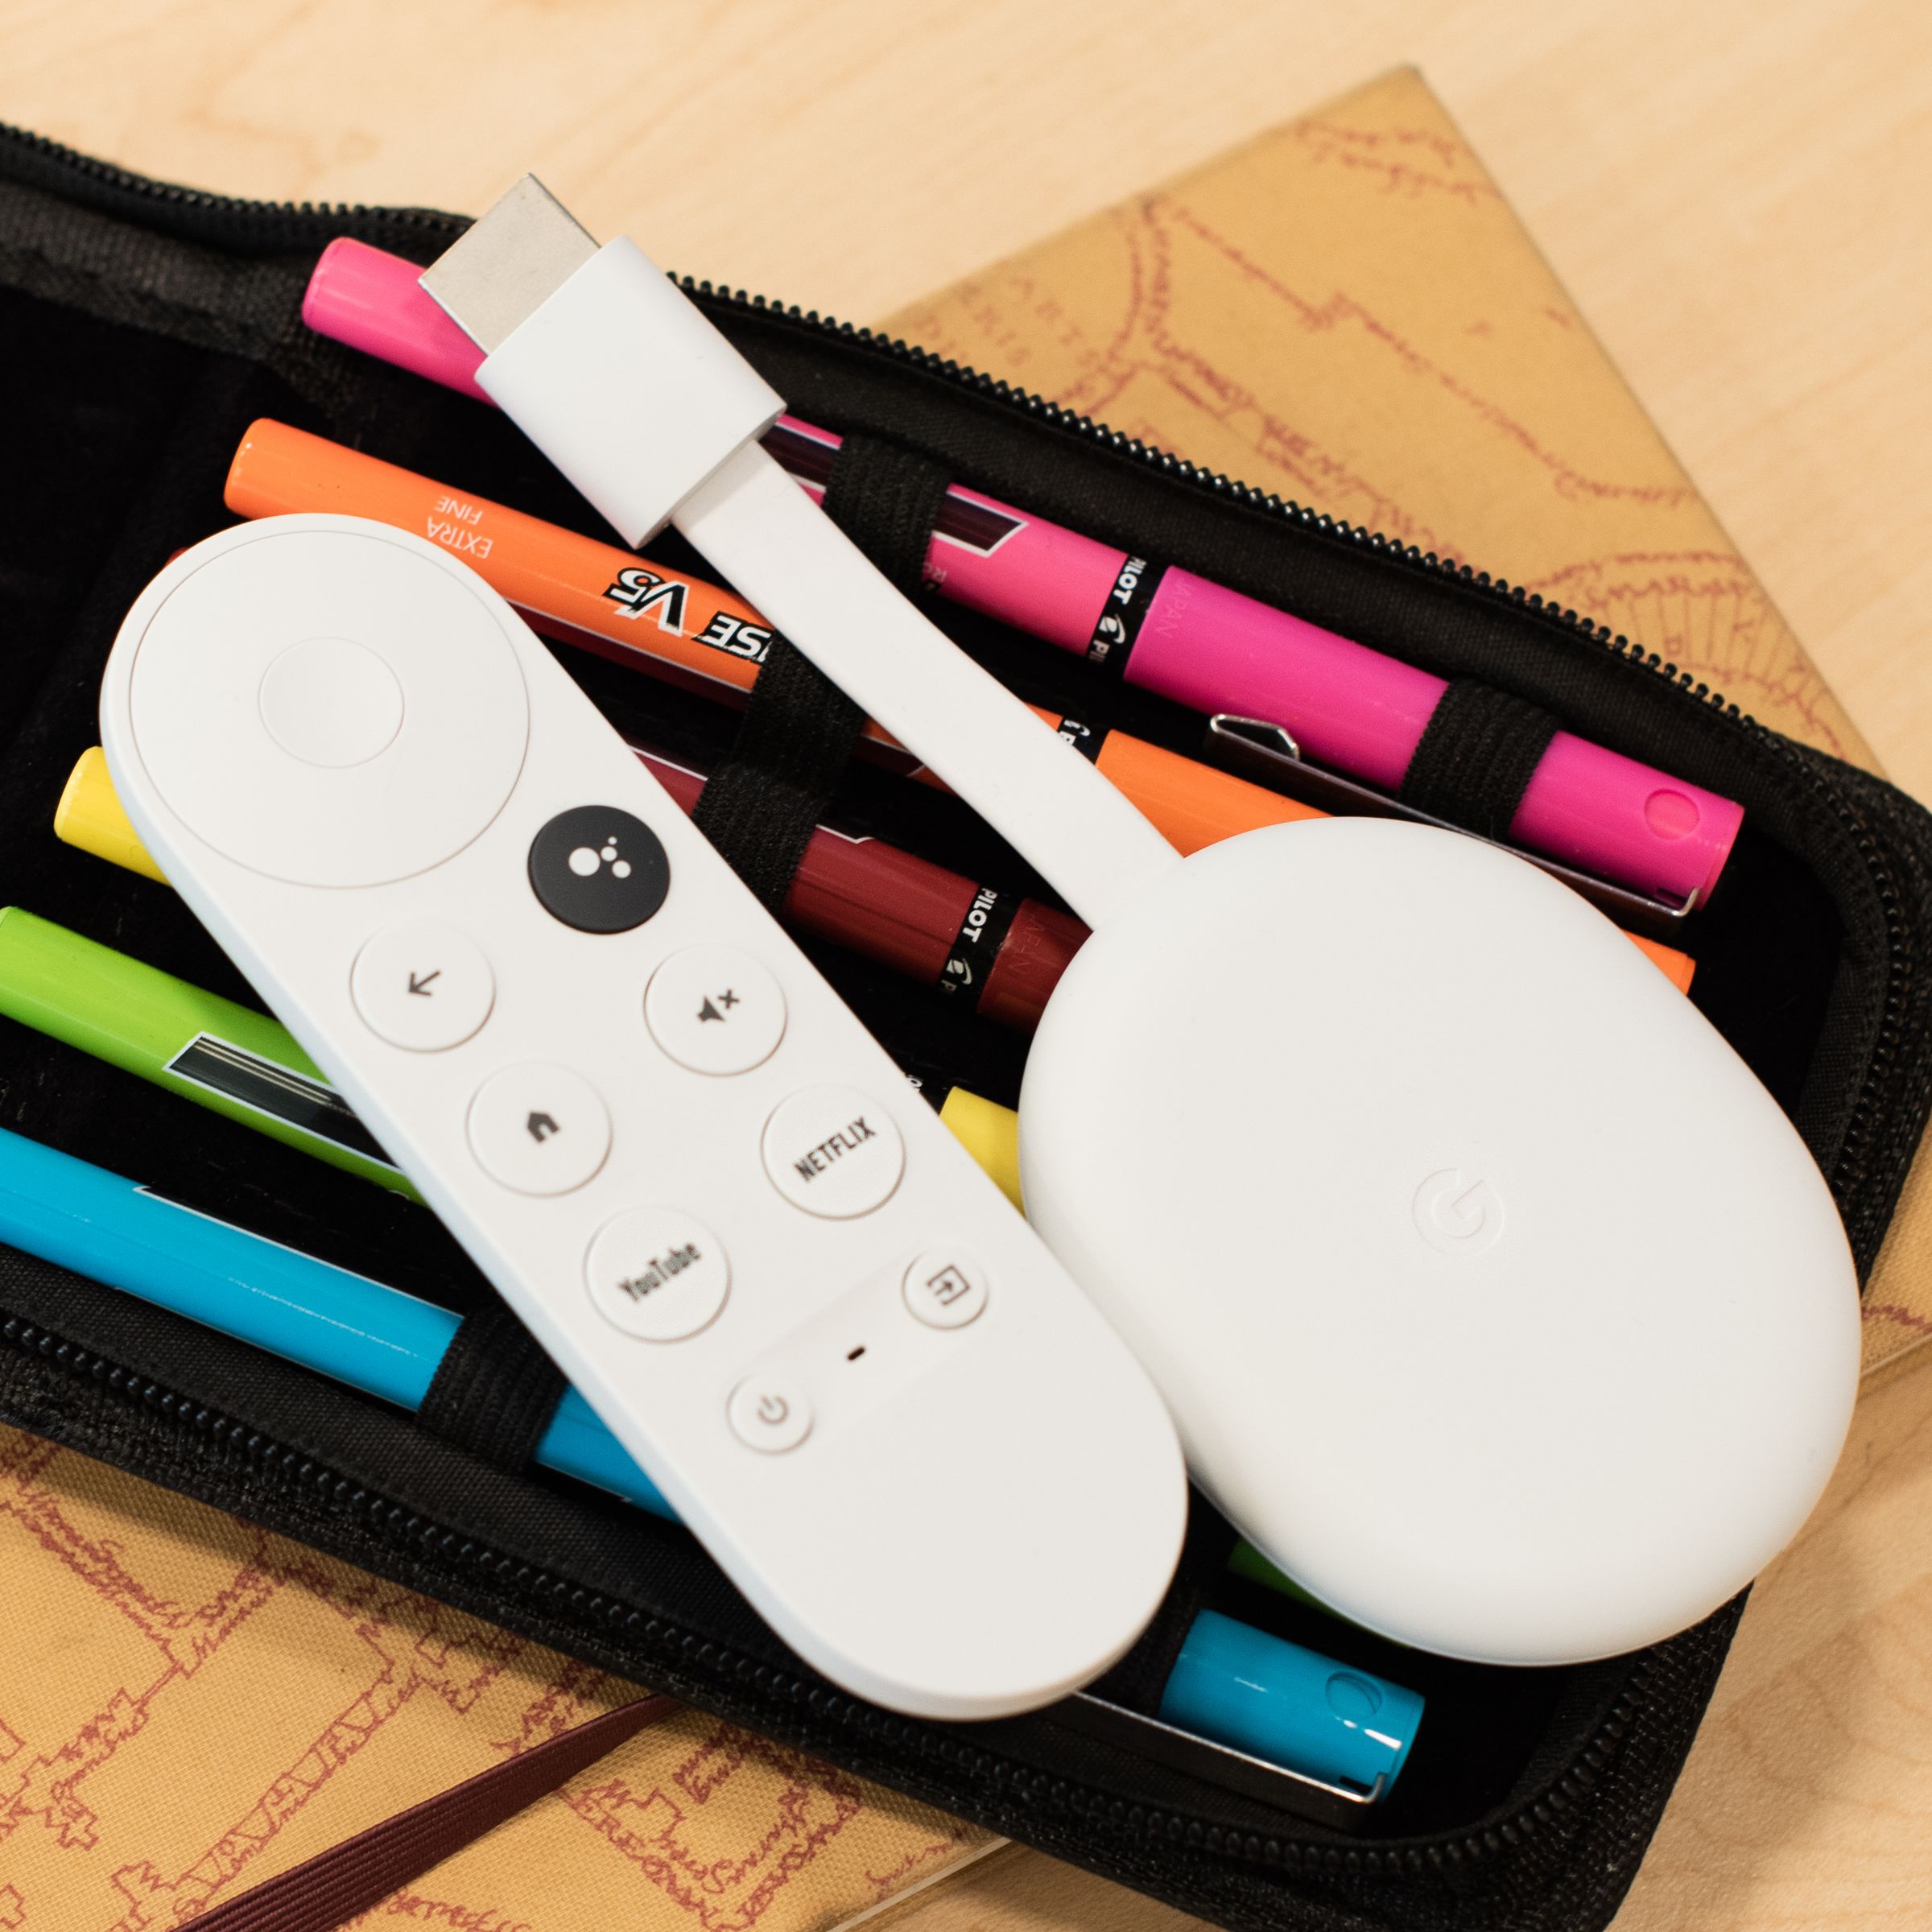 Image of a Chromecast with Google TV sitting on a bag of pens. It’s a white oval-shaped device with an HDMI cable sticking out from the front.